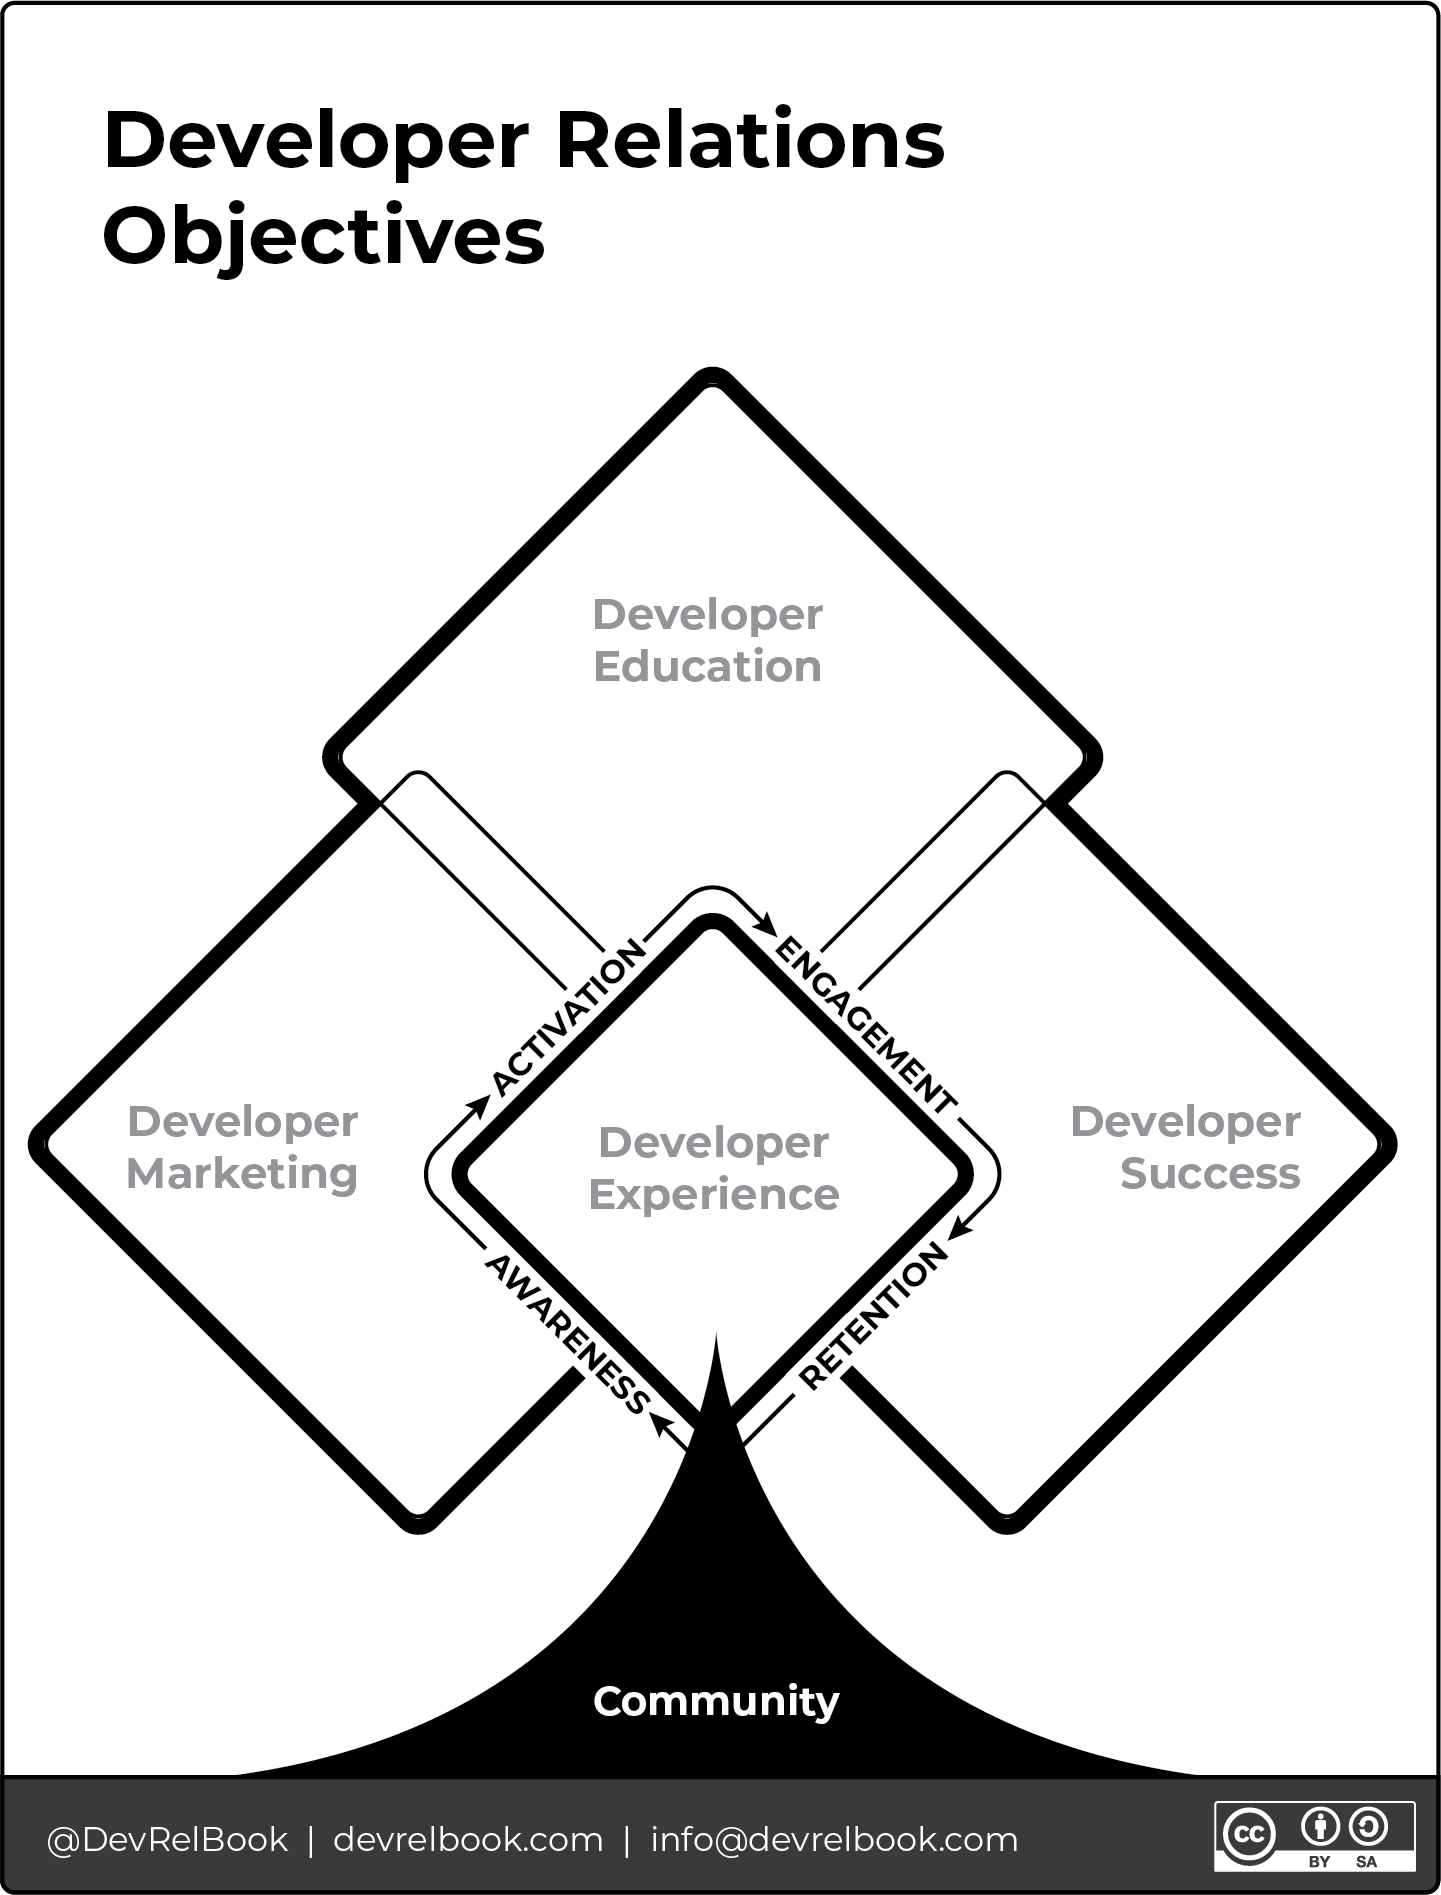 "An infographic titled 'Developer Relations Objectives' with a central diamond-shaped diagram divided into four key components: 'Developer Education', 'Developer Success', 'Developer Experience', and 'Developer Marketing'. Arrows connect these components in a cycle, with words along the arrows indicating the flow of engagement: 'Awareness', 'Activation', 'Engagement', and 'Retention', converging into 'Community' at the base. The graphic has a minimalistic design, primarily in black and white, and includes the handle @DevRelBook and the website info@devrelbook.com at the bottom, with a Creative Commons BY-SA license symbol."